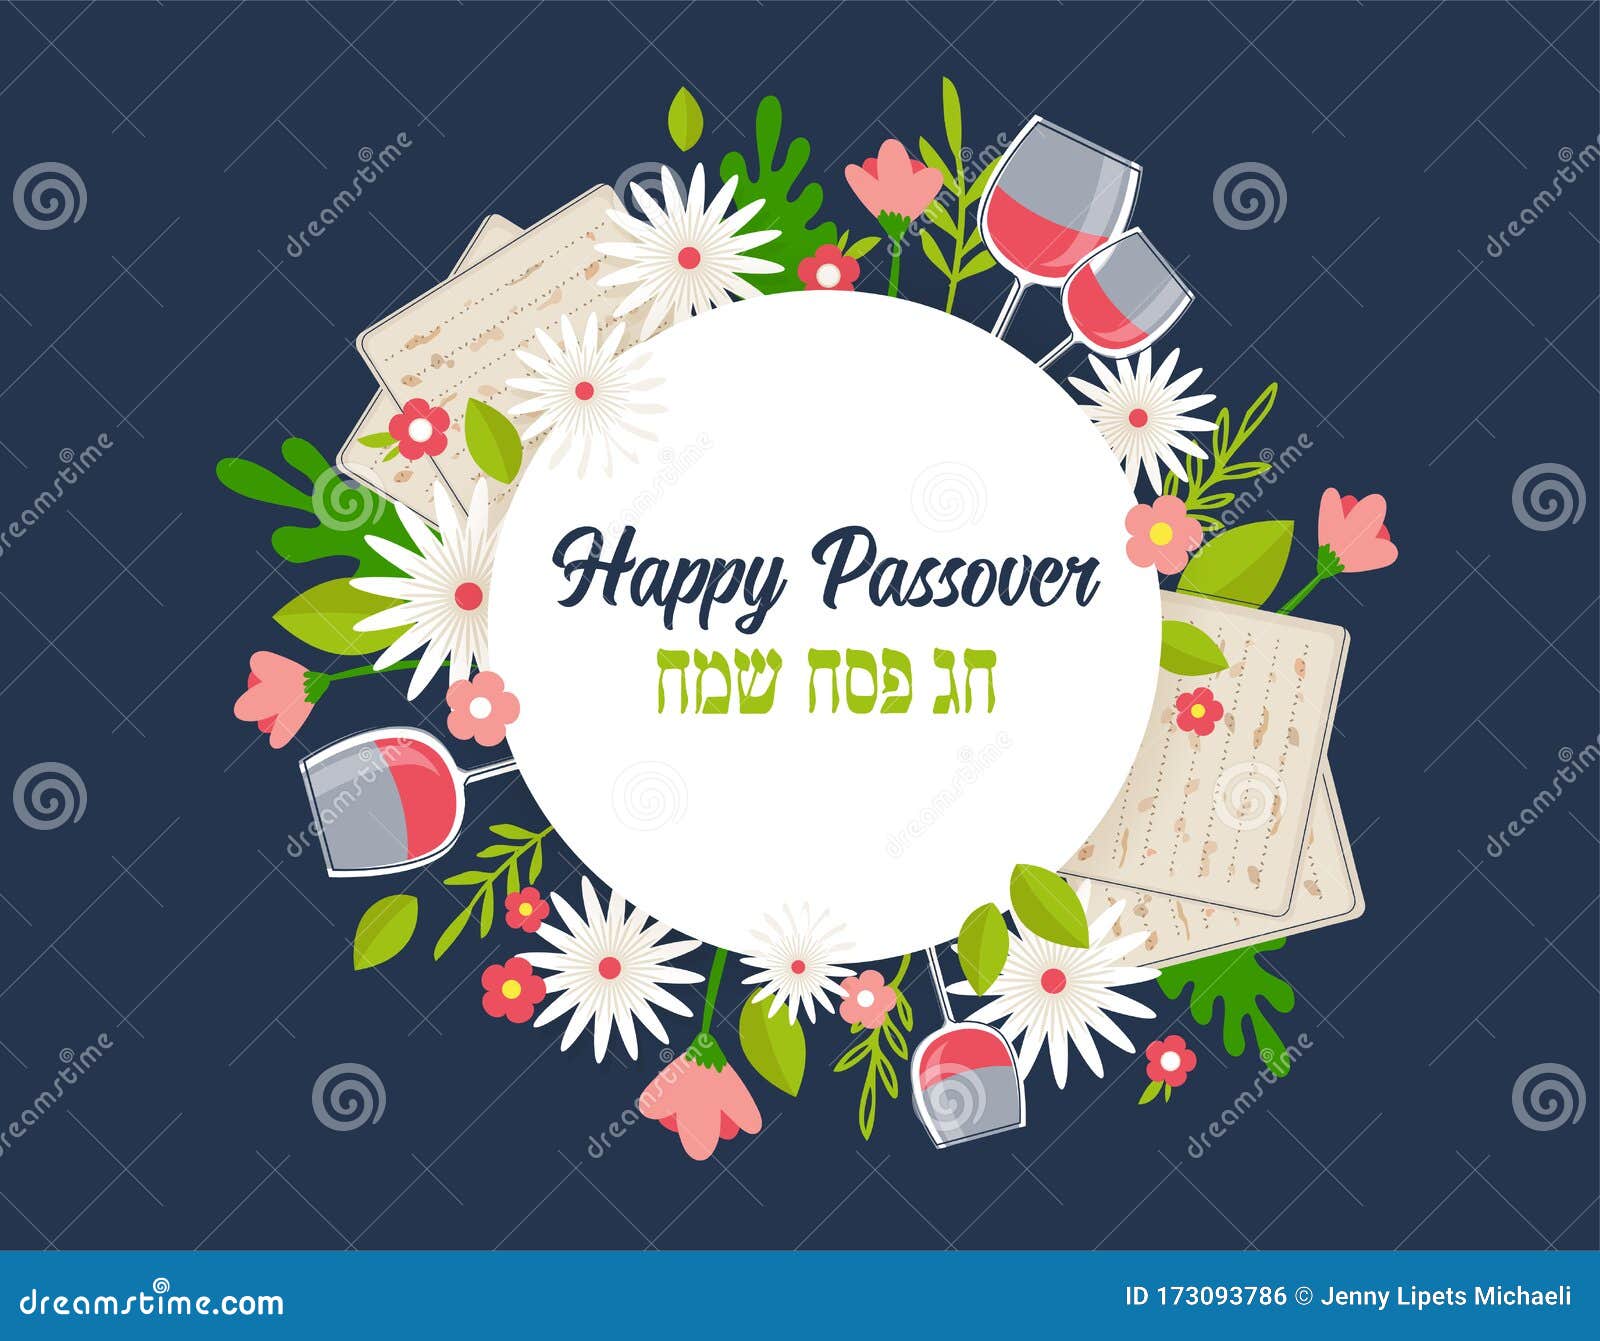 pesah celebration concept , jewish passover holiday. greeting cards with traditional four wine glasses, matzah and